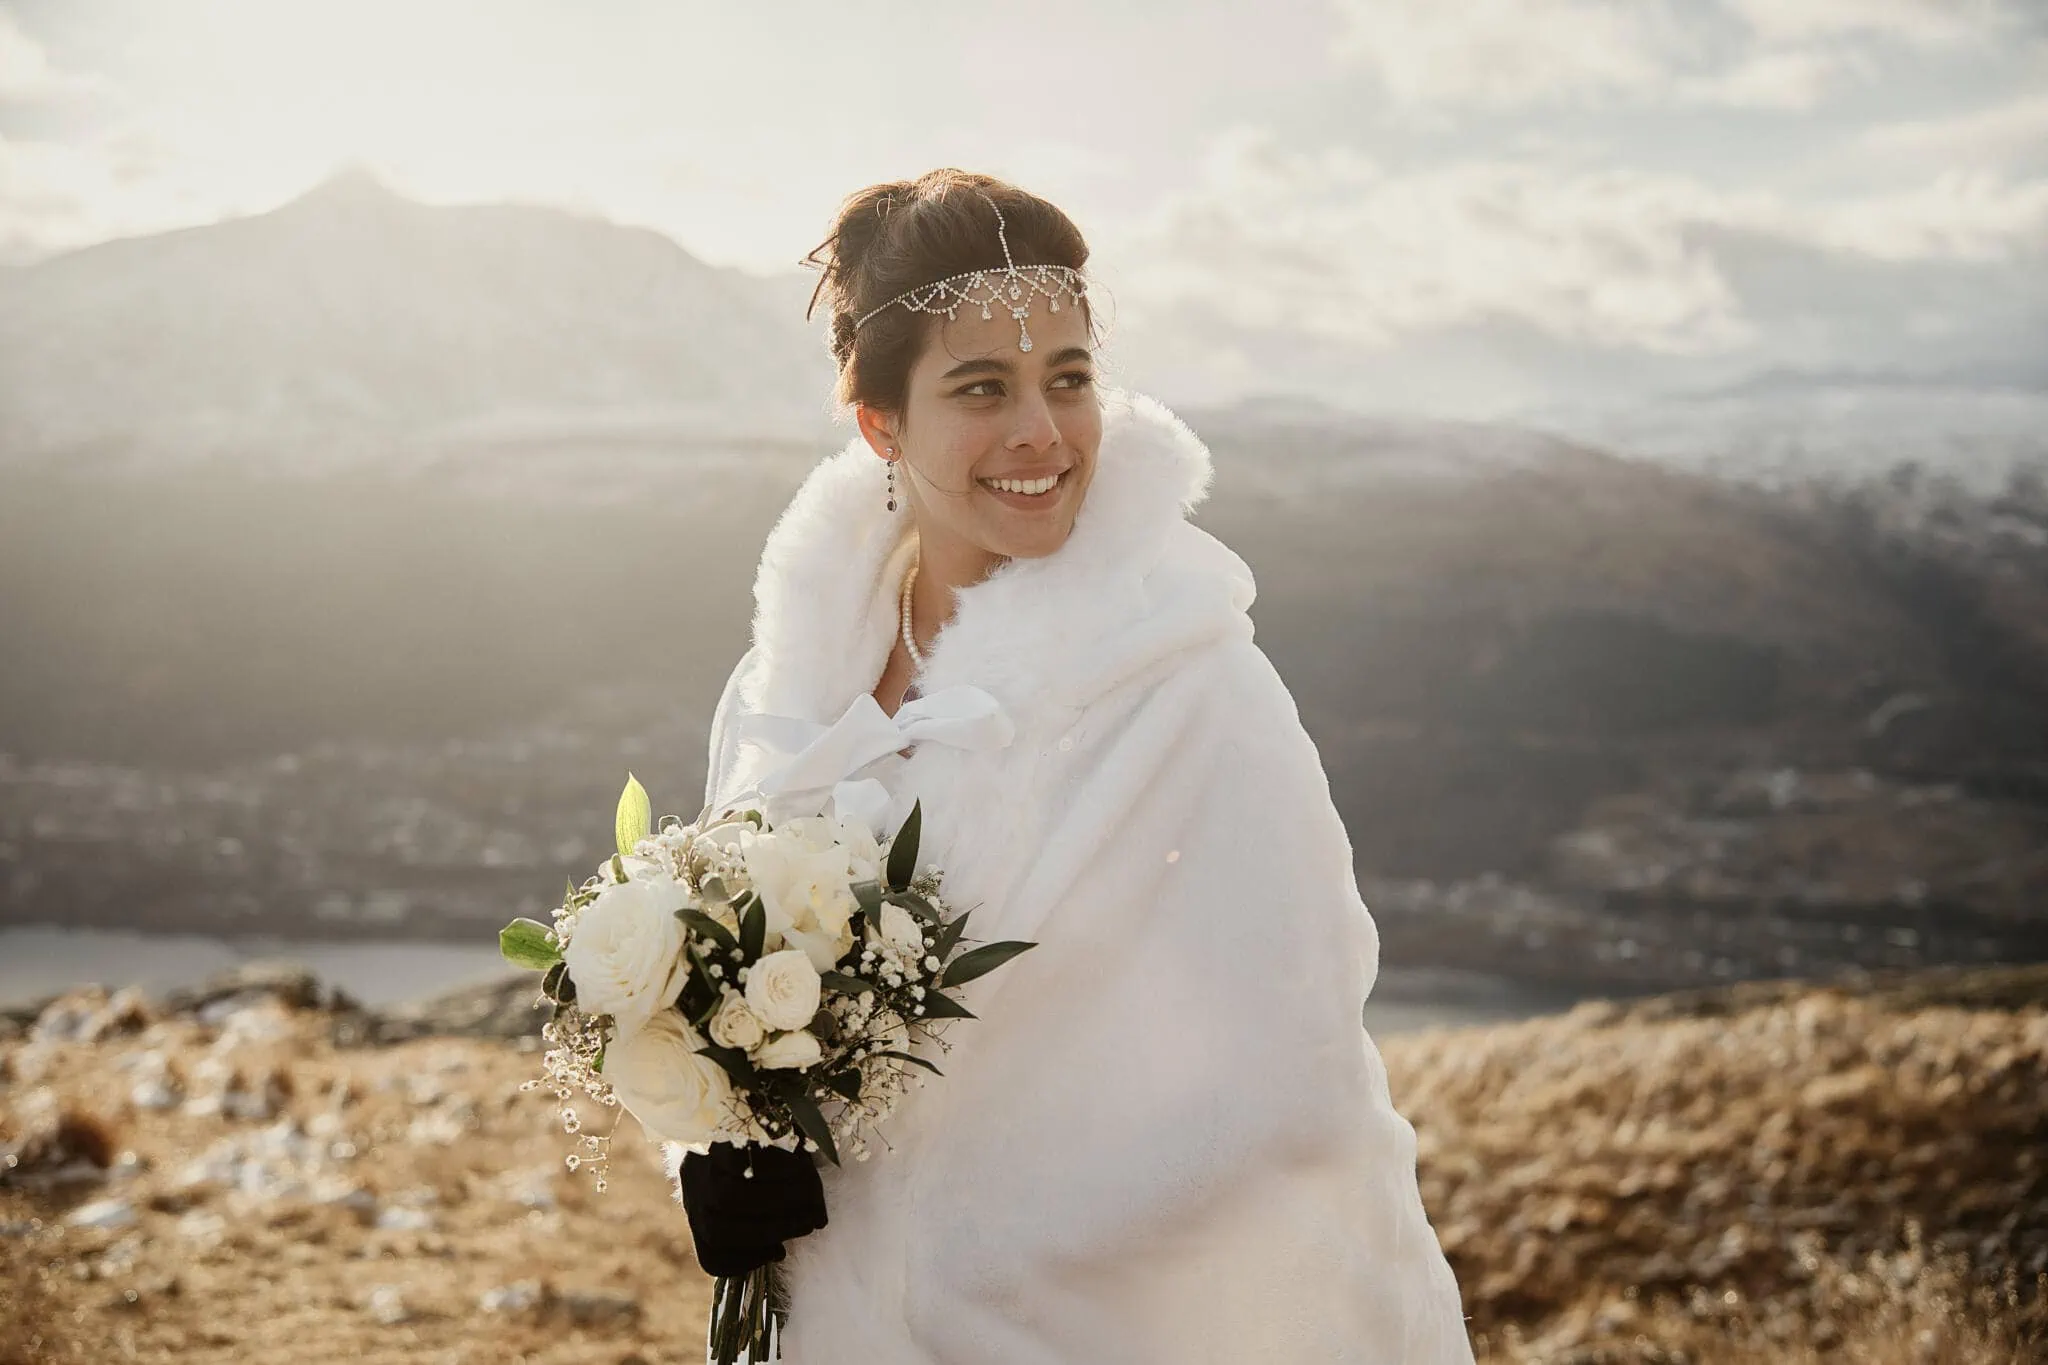 Queenstown New Zealand Elopement Wedding Photographer - A bride, Yumn, is standing on top of a hill in Queenstown with mountains in the background.